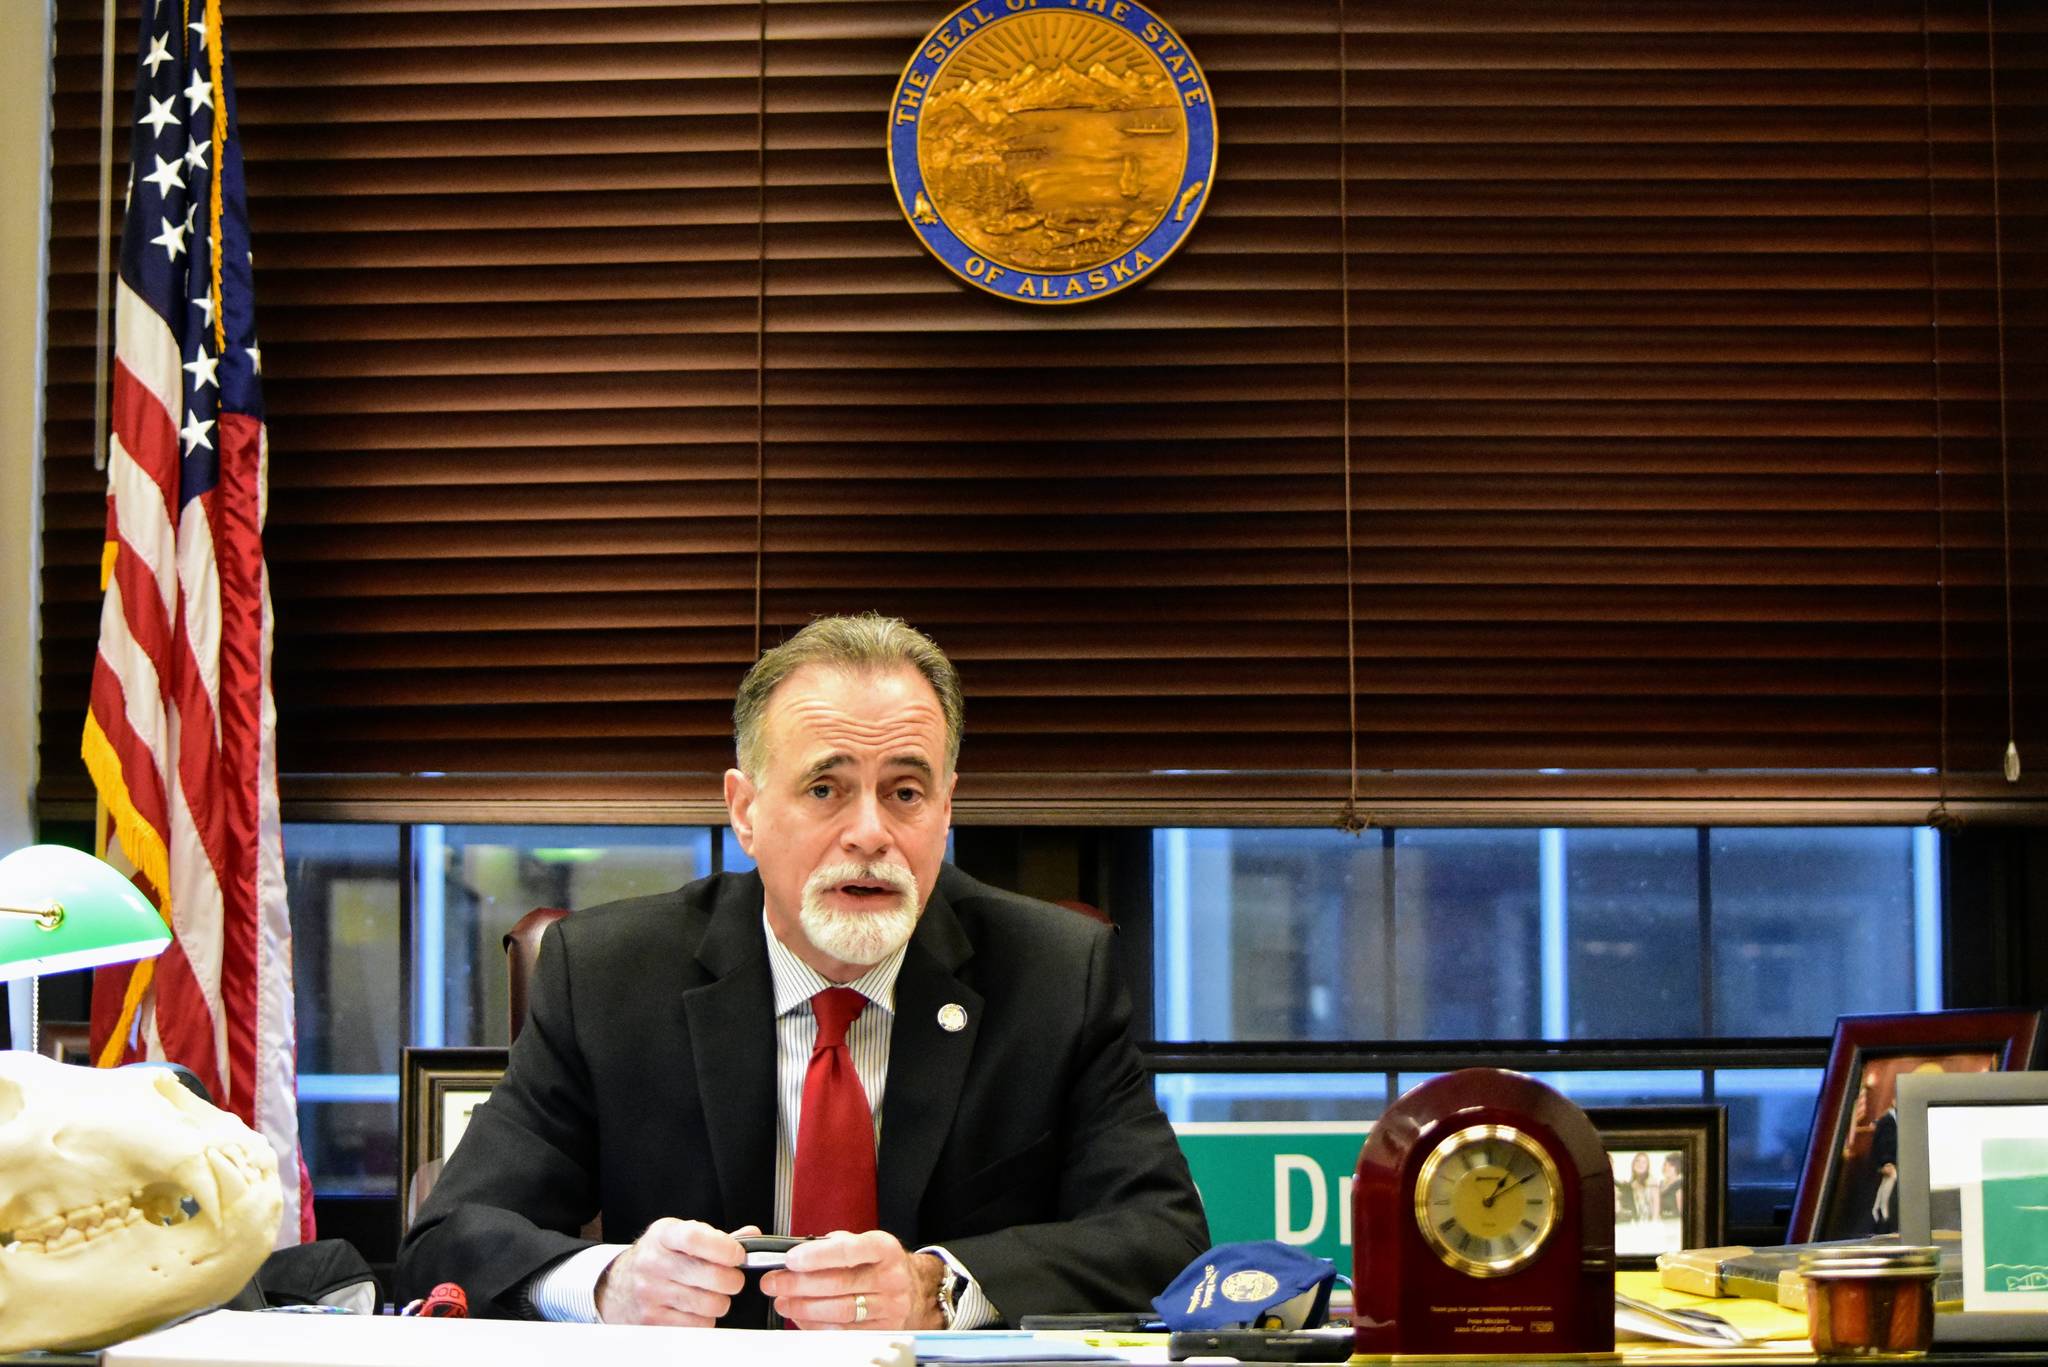 Senate President Sen. Peter Micciche, R-Soldotna, spoke with the Empire in his office at the capitol on Friday, Jan. 22, 2021, saying he was hopeful about finding a path forward for the state and that he wanted better communication between the Legislature and the public. (Peter Segall / Juneau Empire)